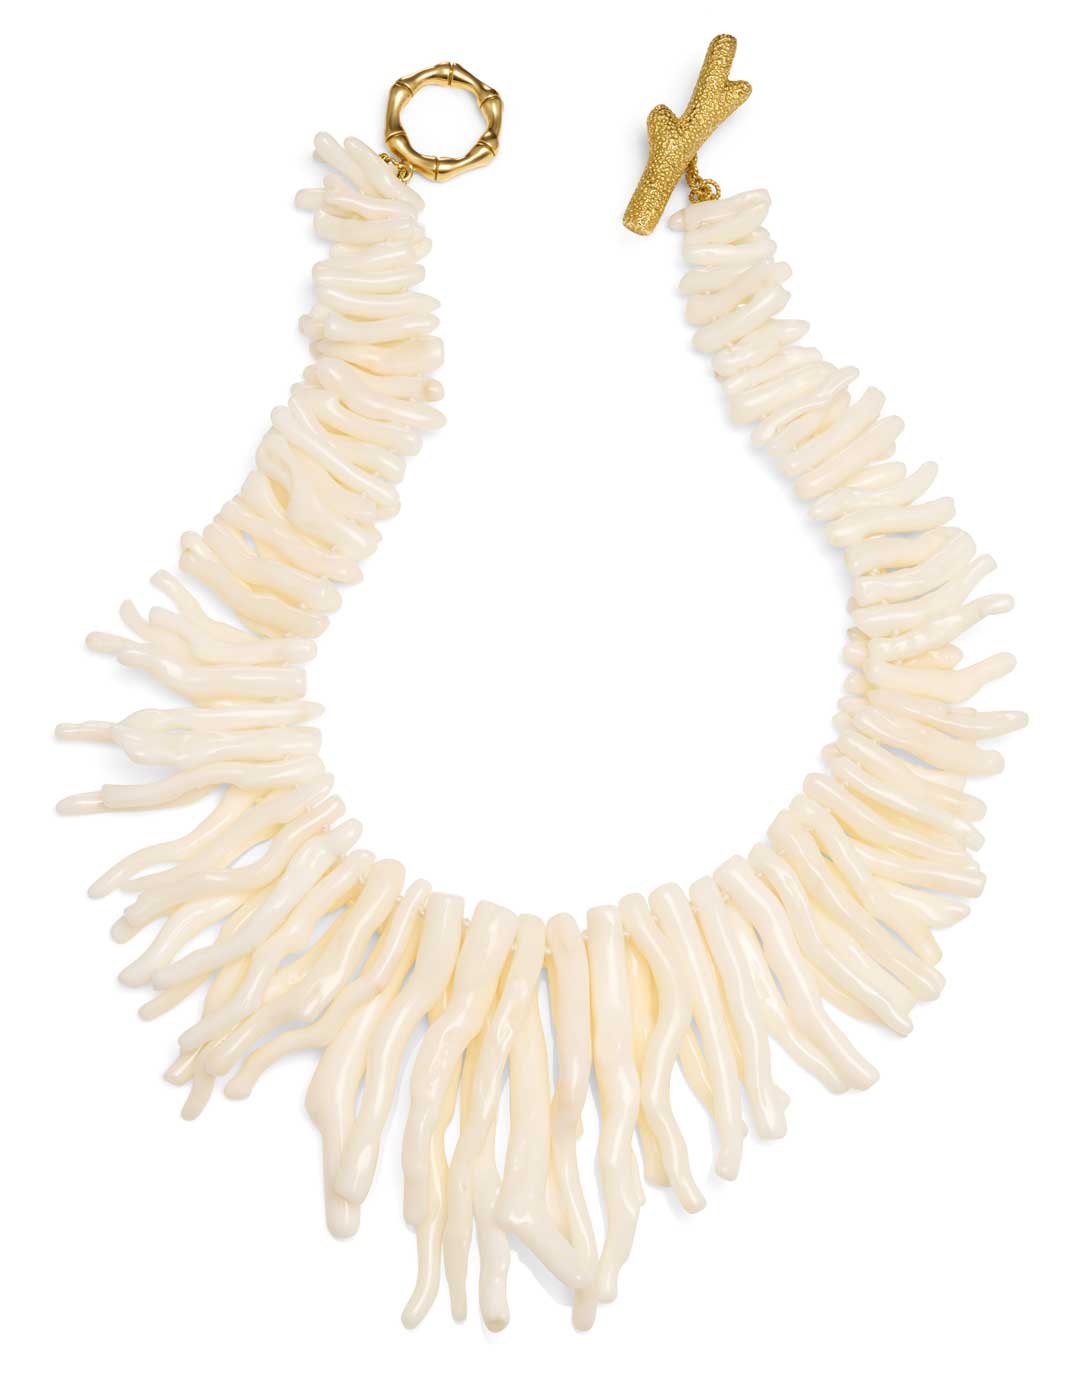 Coral-Bamboo-Branch-White-Coral-NK-1